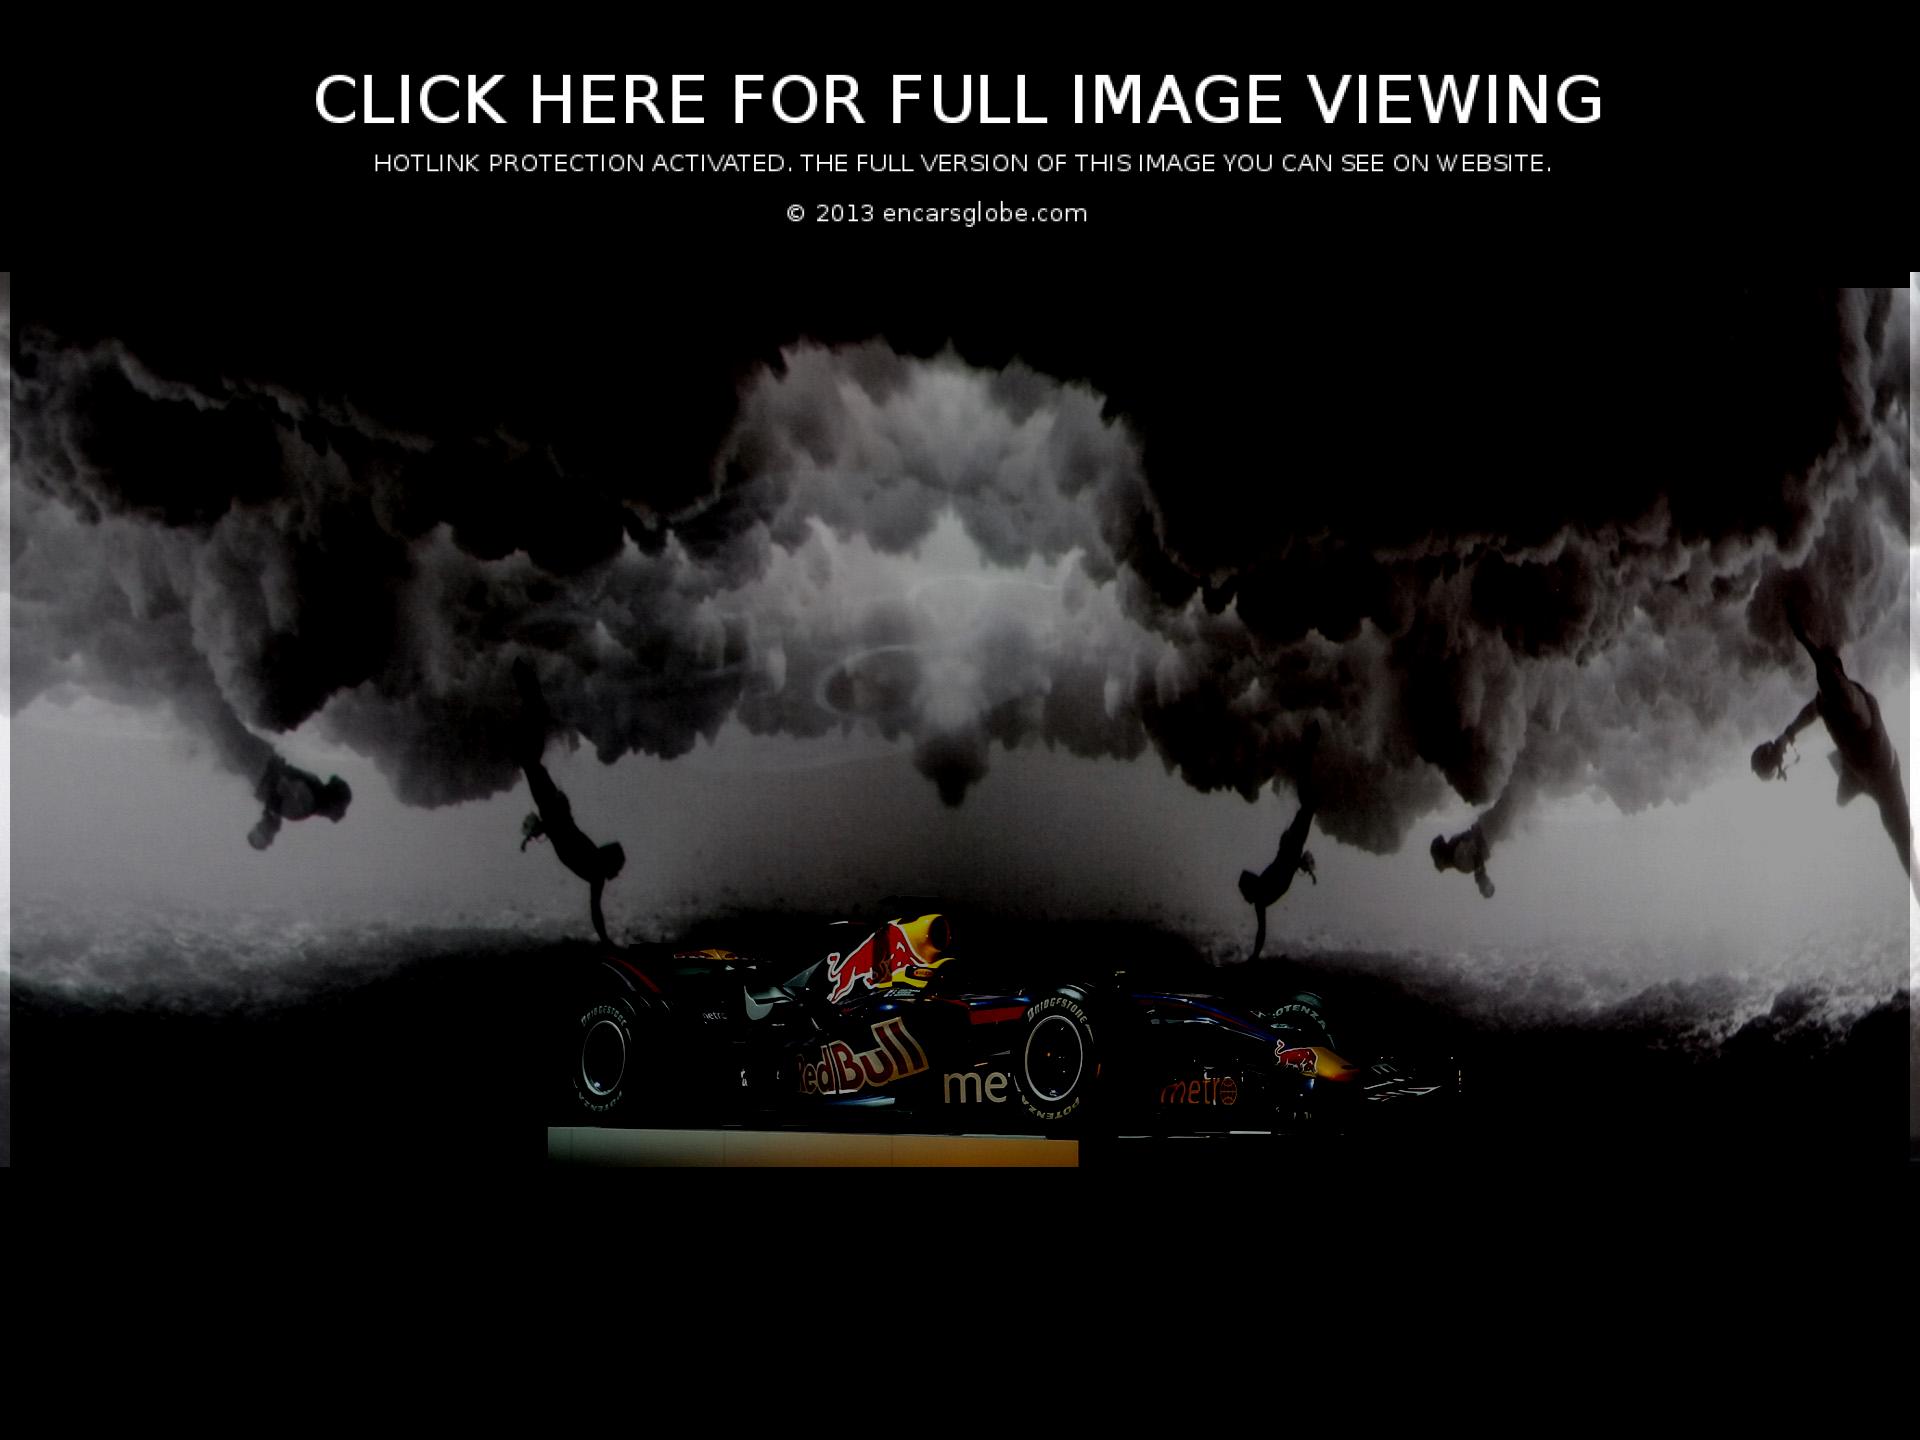 Red Bull Red Bull - Renault F1: Galerie de photos, informations complètes...